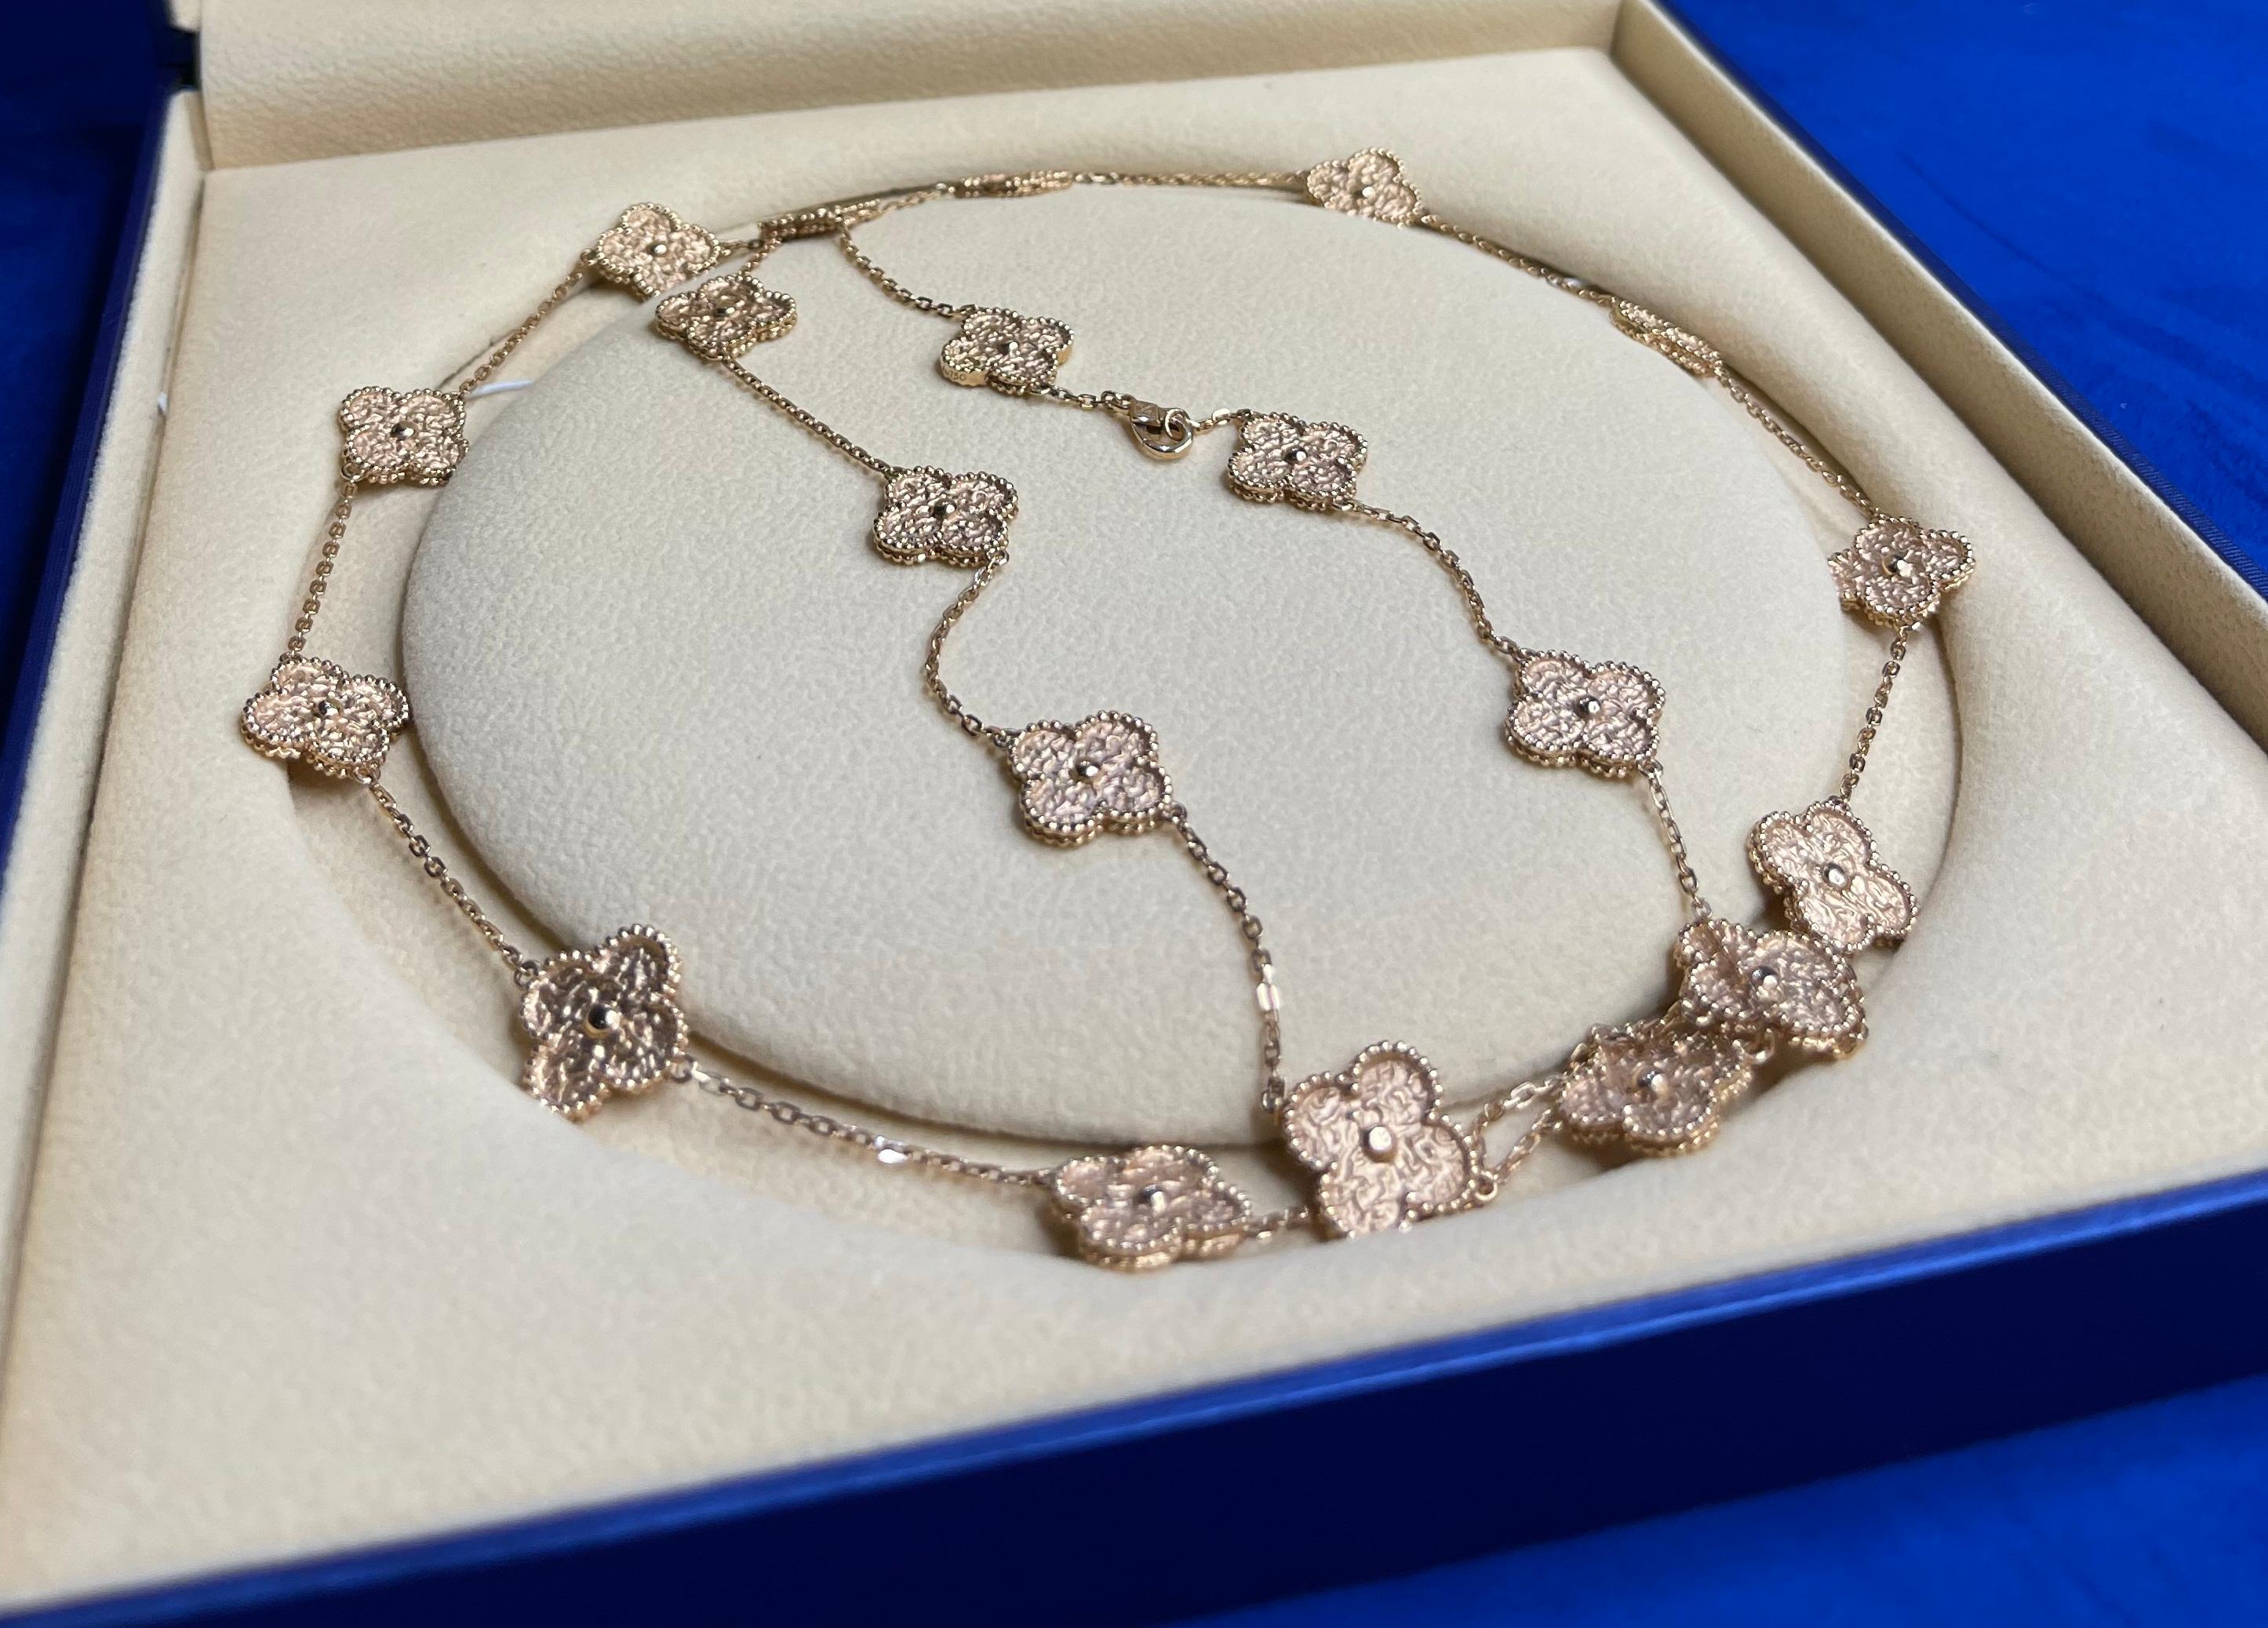 Full Item Details
18K Rose Gold / AU 750
Length of Necklace: 38 Inches Long
Total Weight: 47.20 grams
